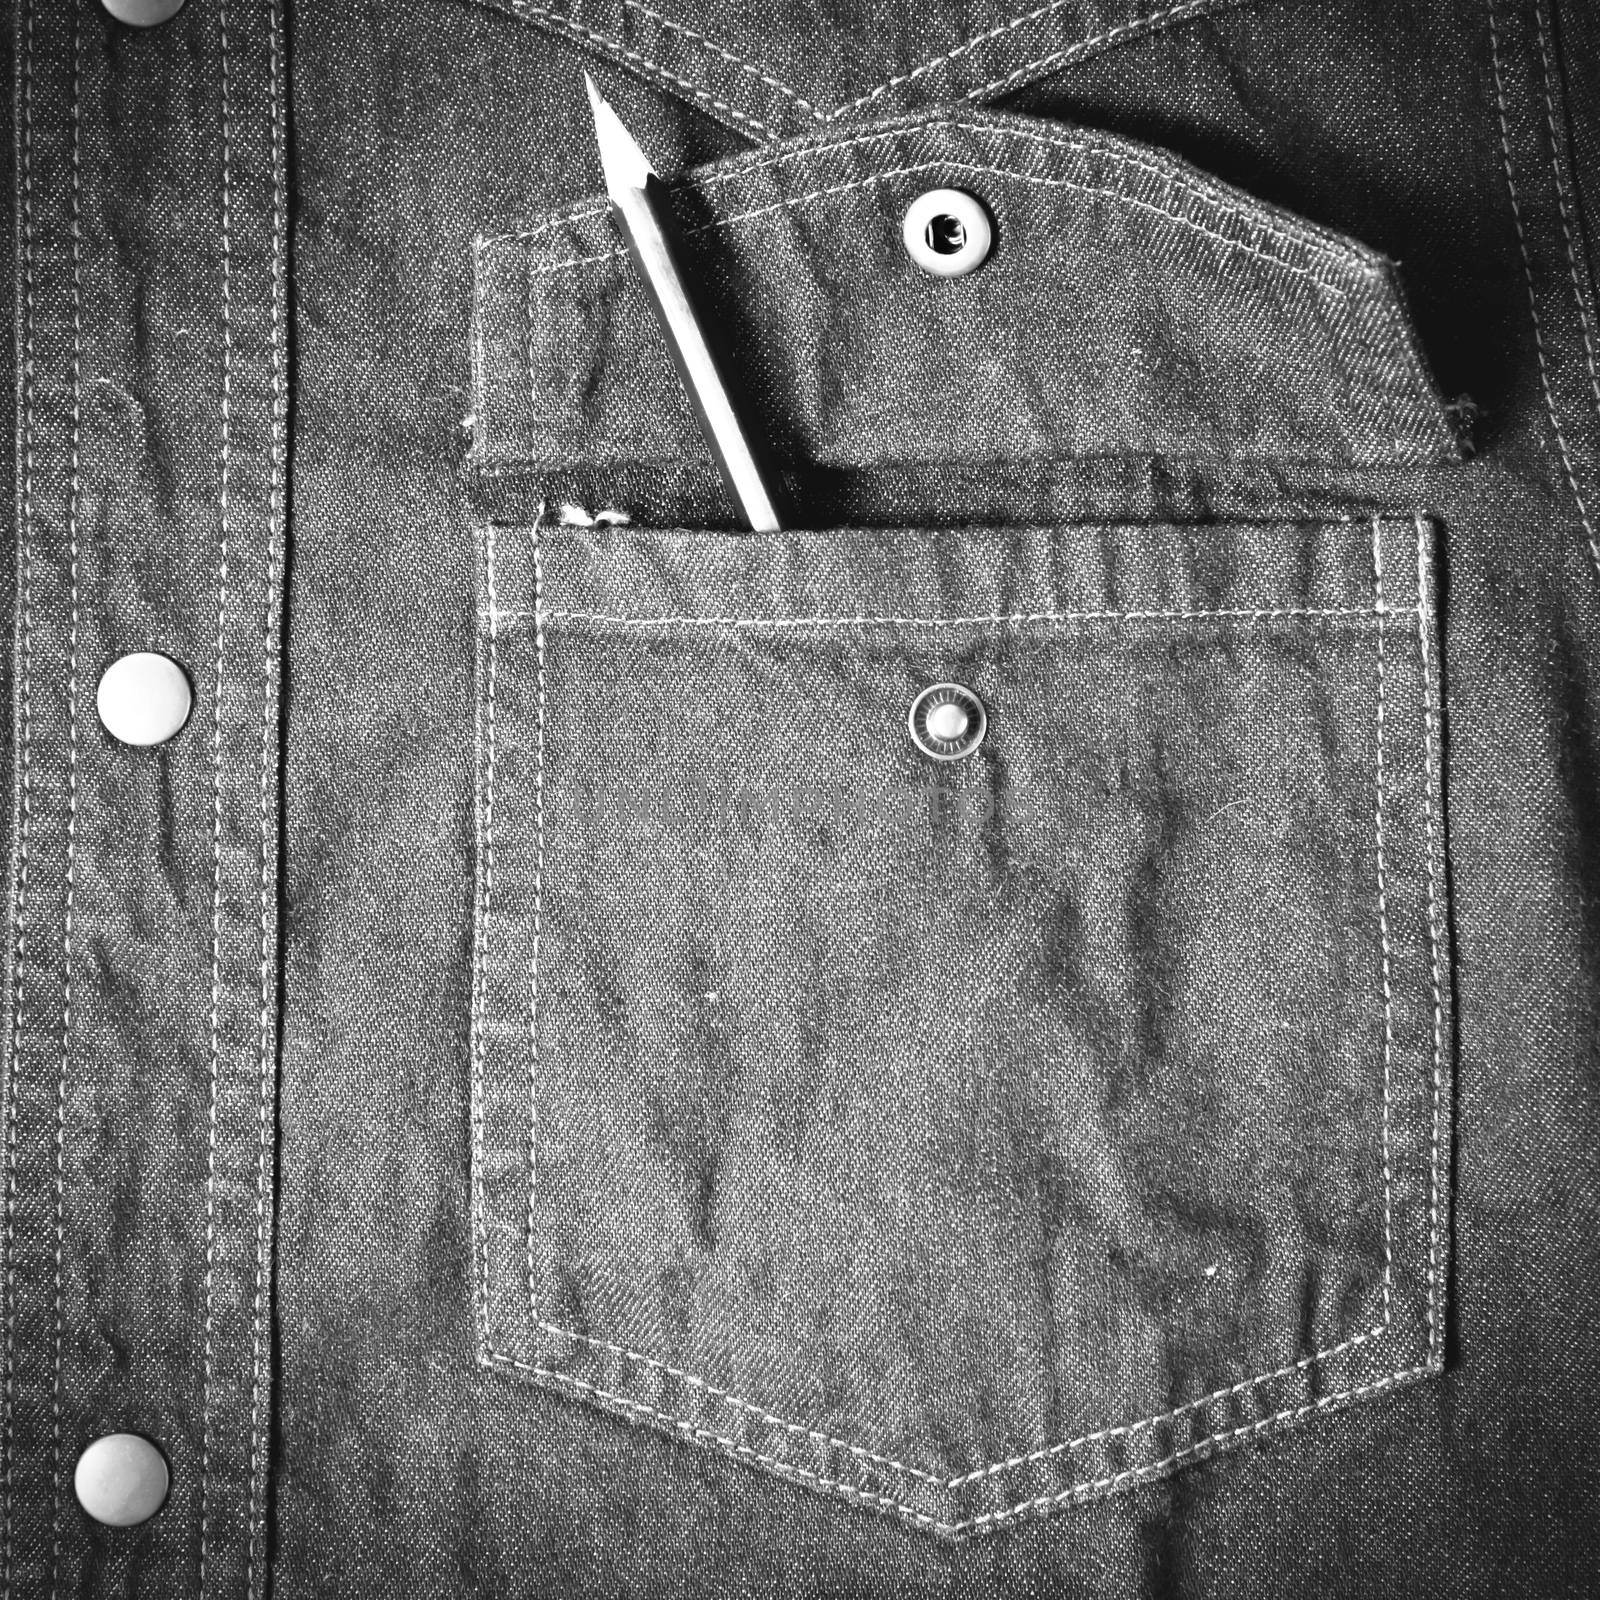 pencil in jean pocket black and white tone color style by ammza12